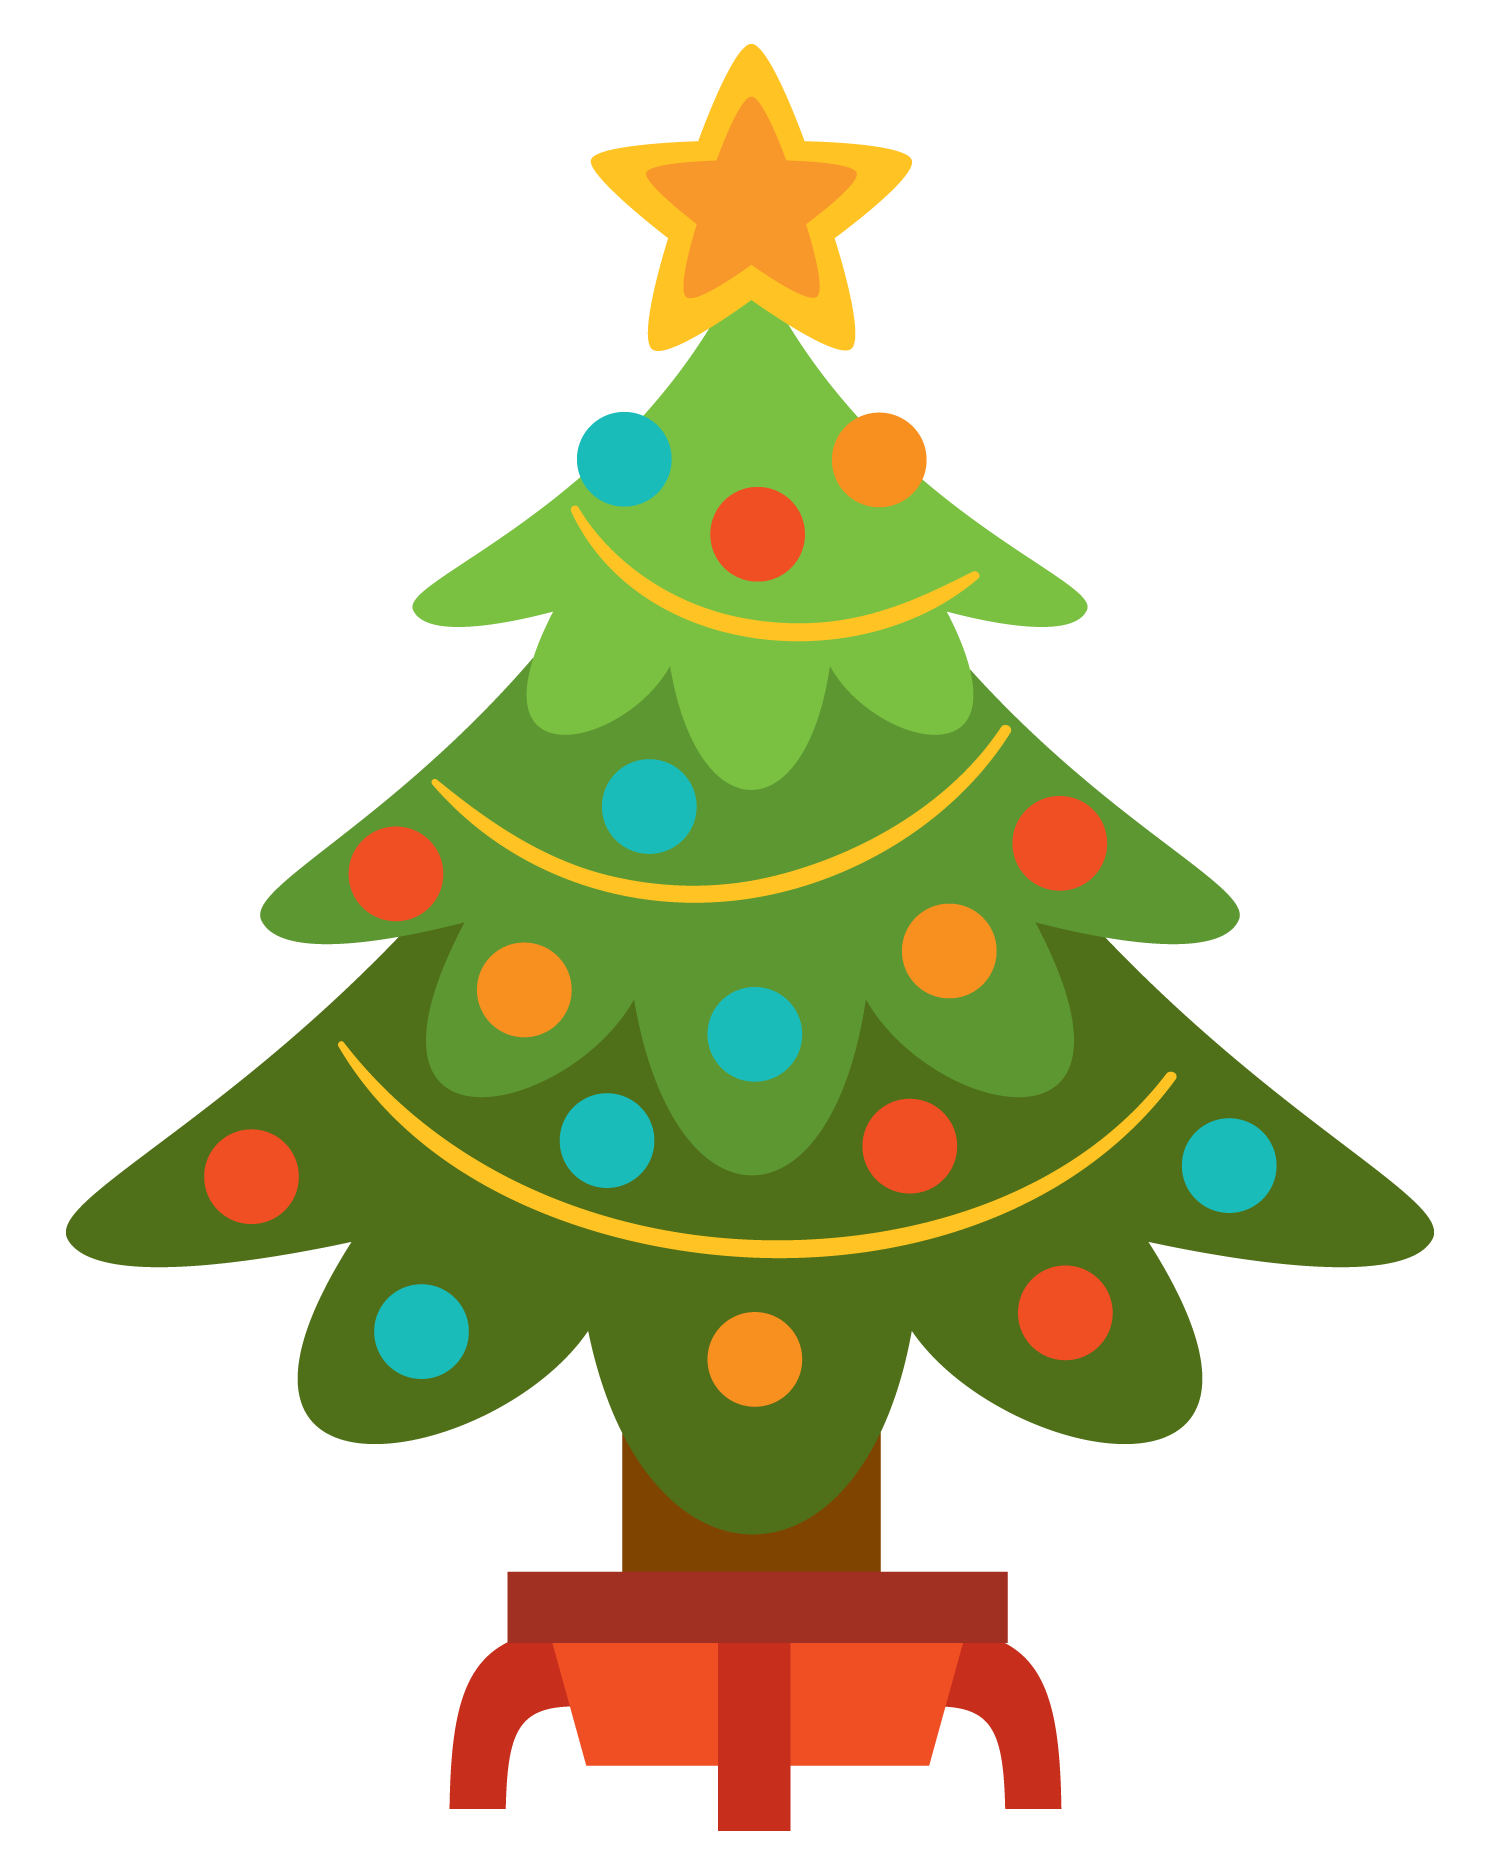 Christmas Tree Images Clip Art - ClipArt Best